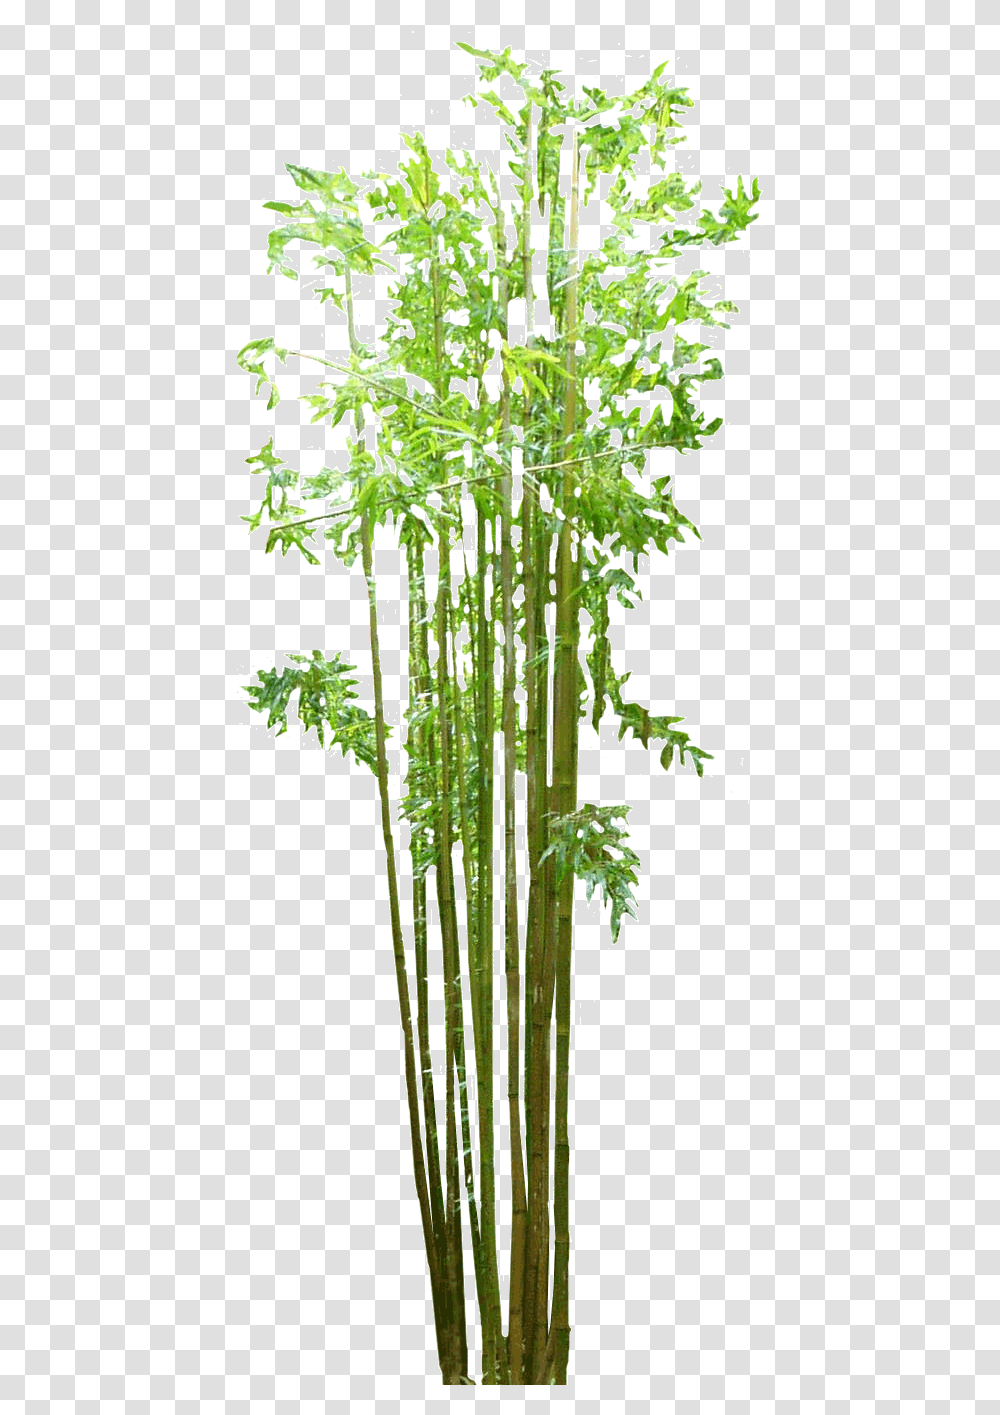 Bamboo Free Images Bamboo Trees, Plant, Flower, Blossom, Jar Transparent Png